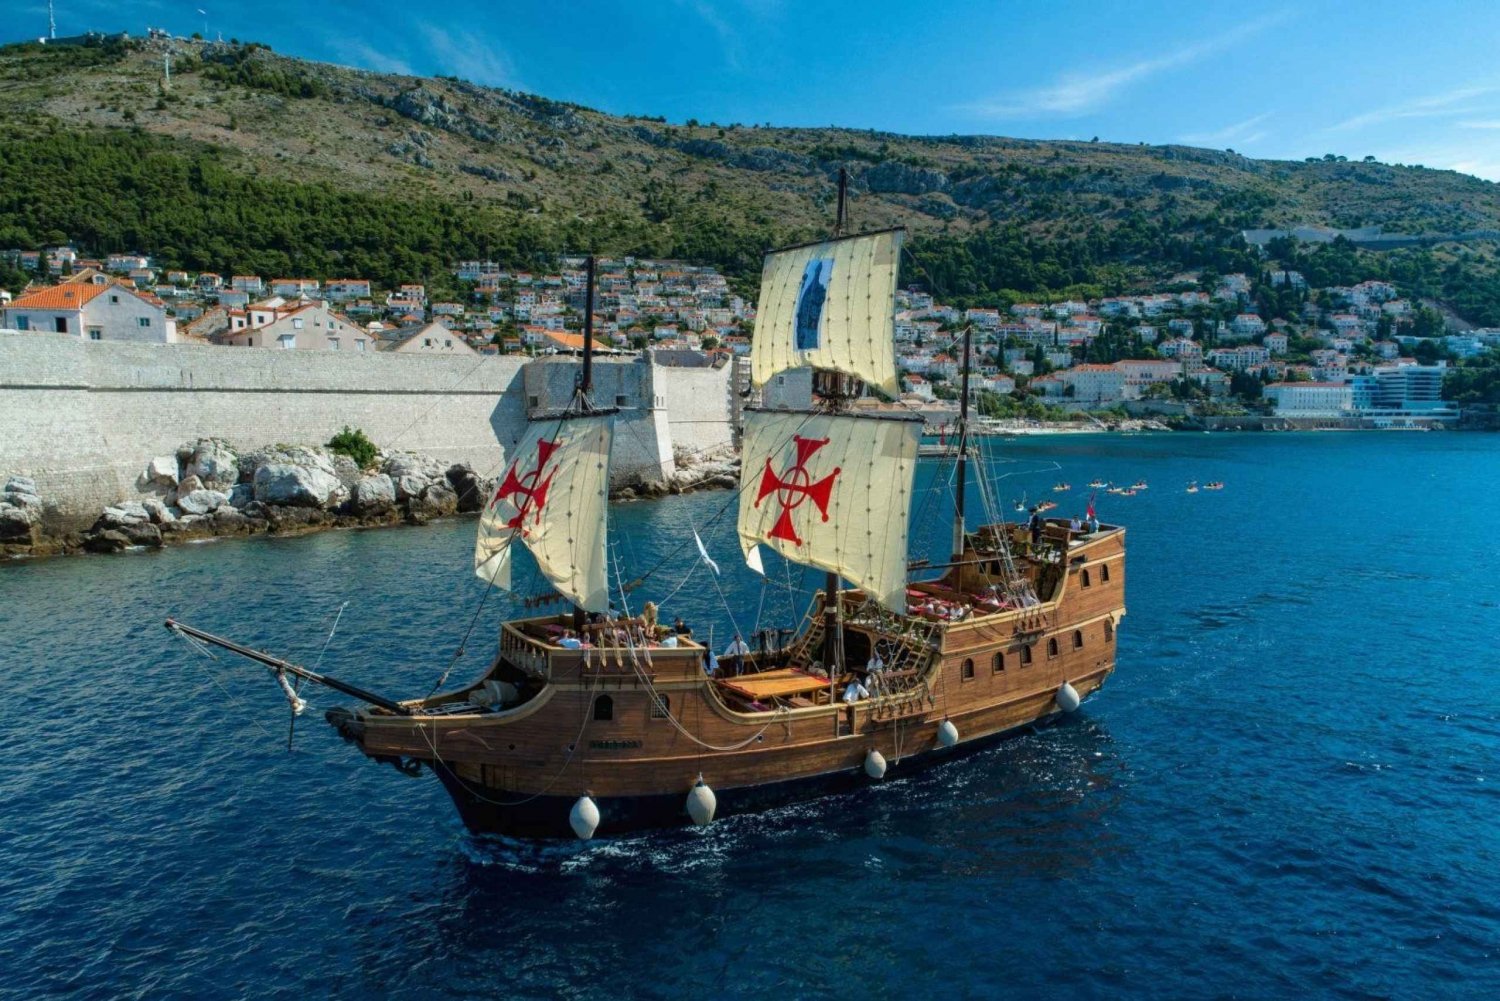 Galleon Elaphiti Islands Cruise from Dubrovnik with Lunch